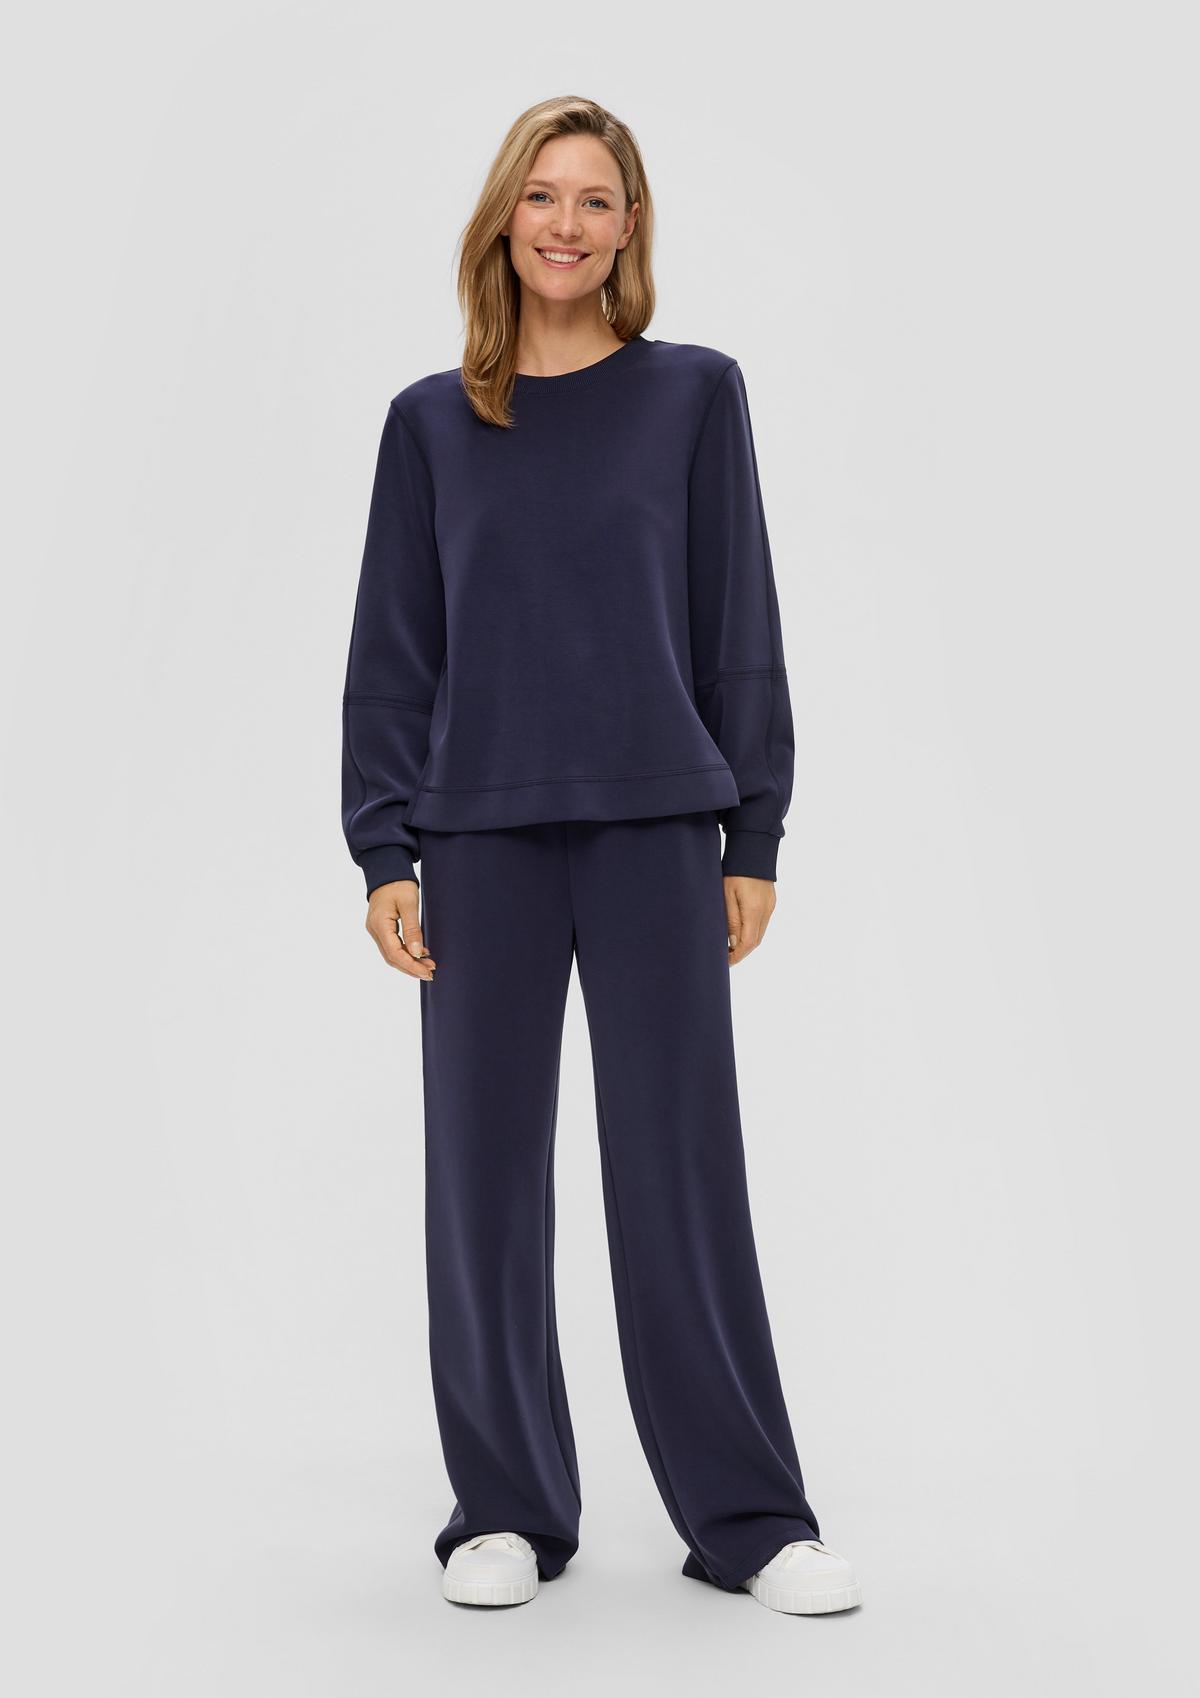 s.Oliver Scuba trousers with a wide leg